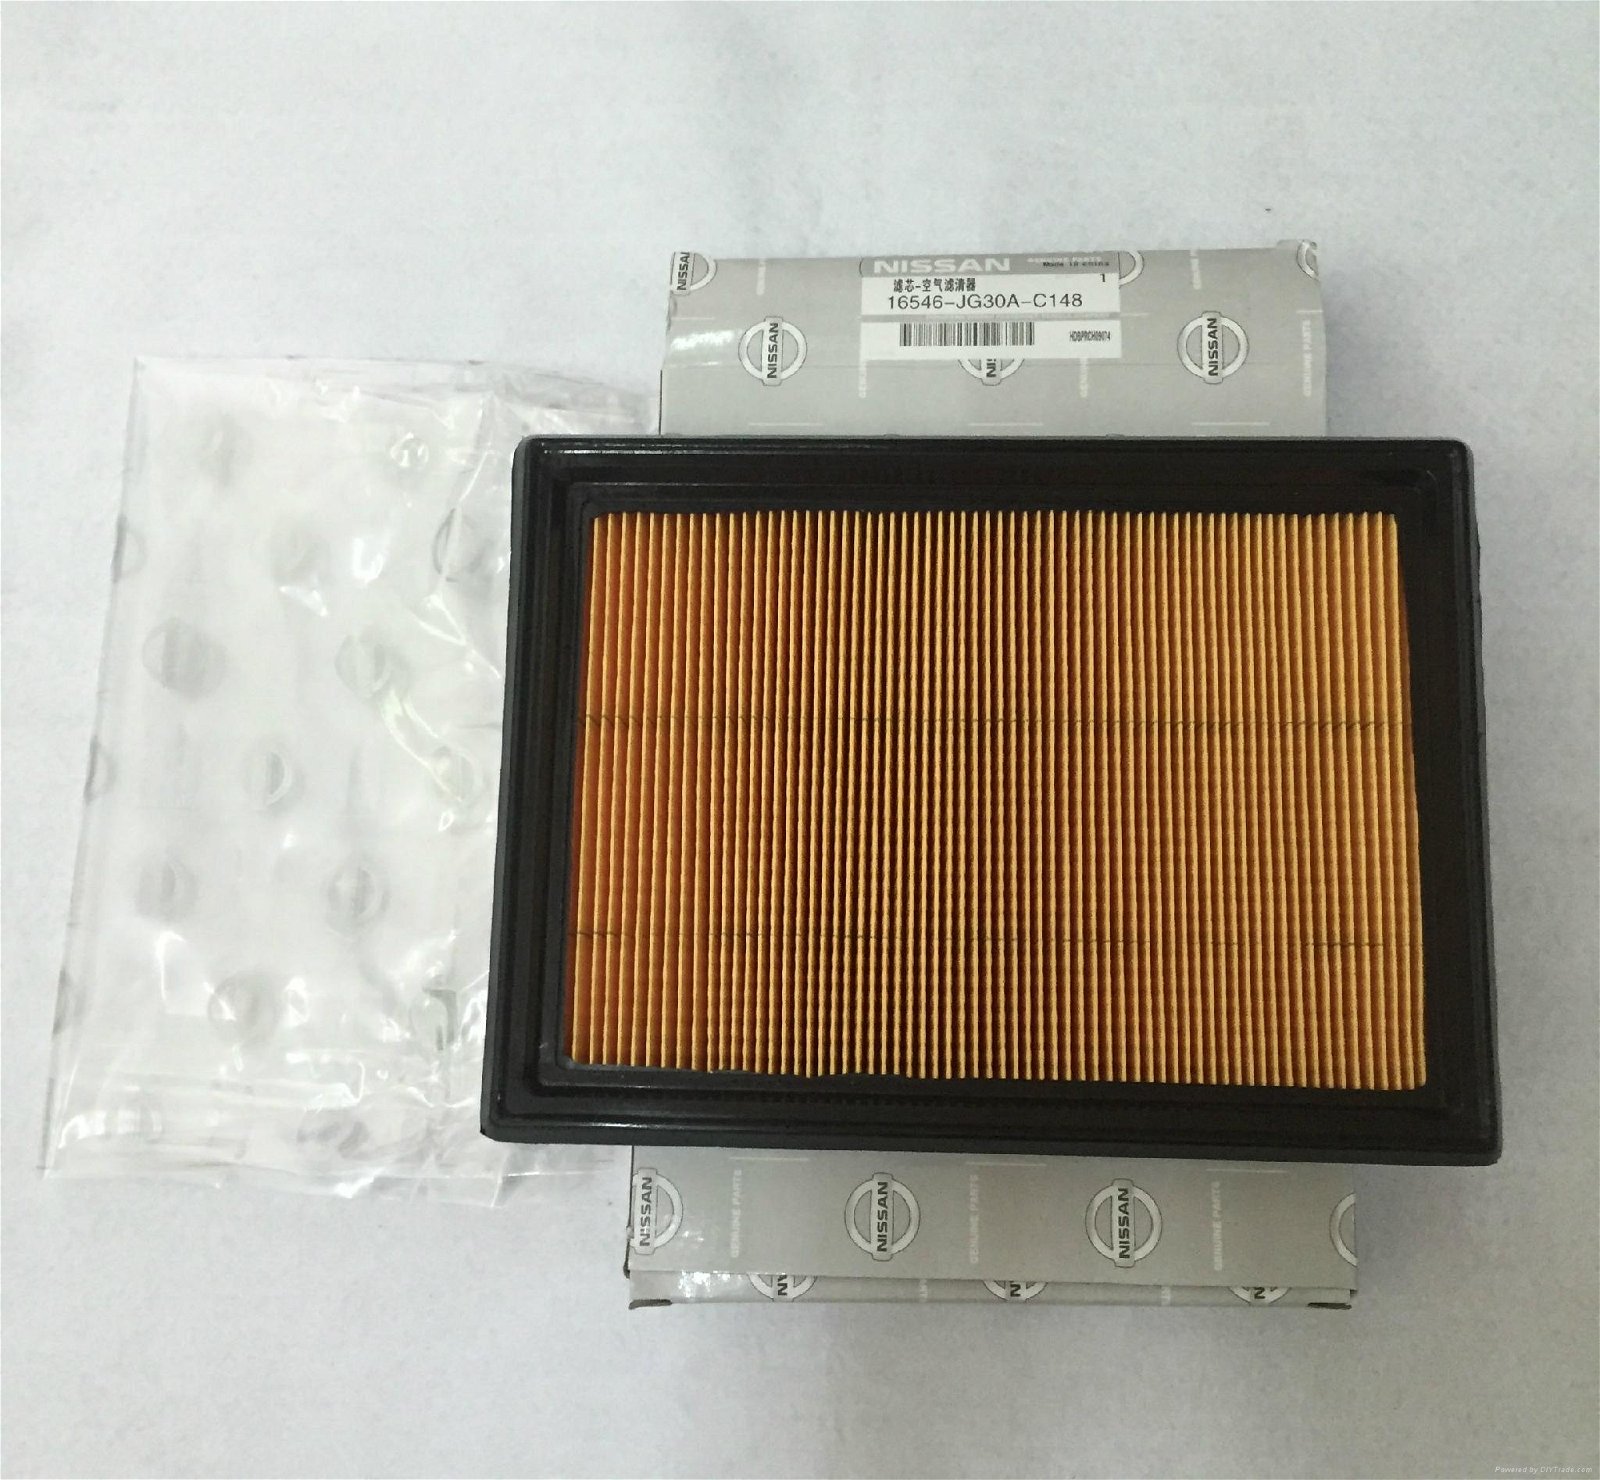 Air Filter  OEM#:16546-JG30A  for NISSAN  X-TRAIL 2007